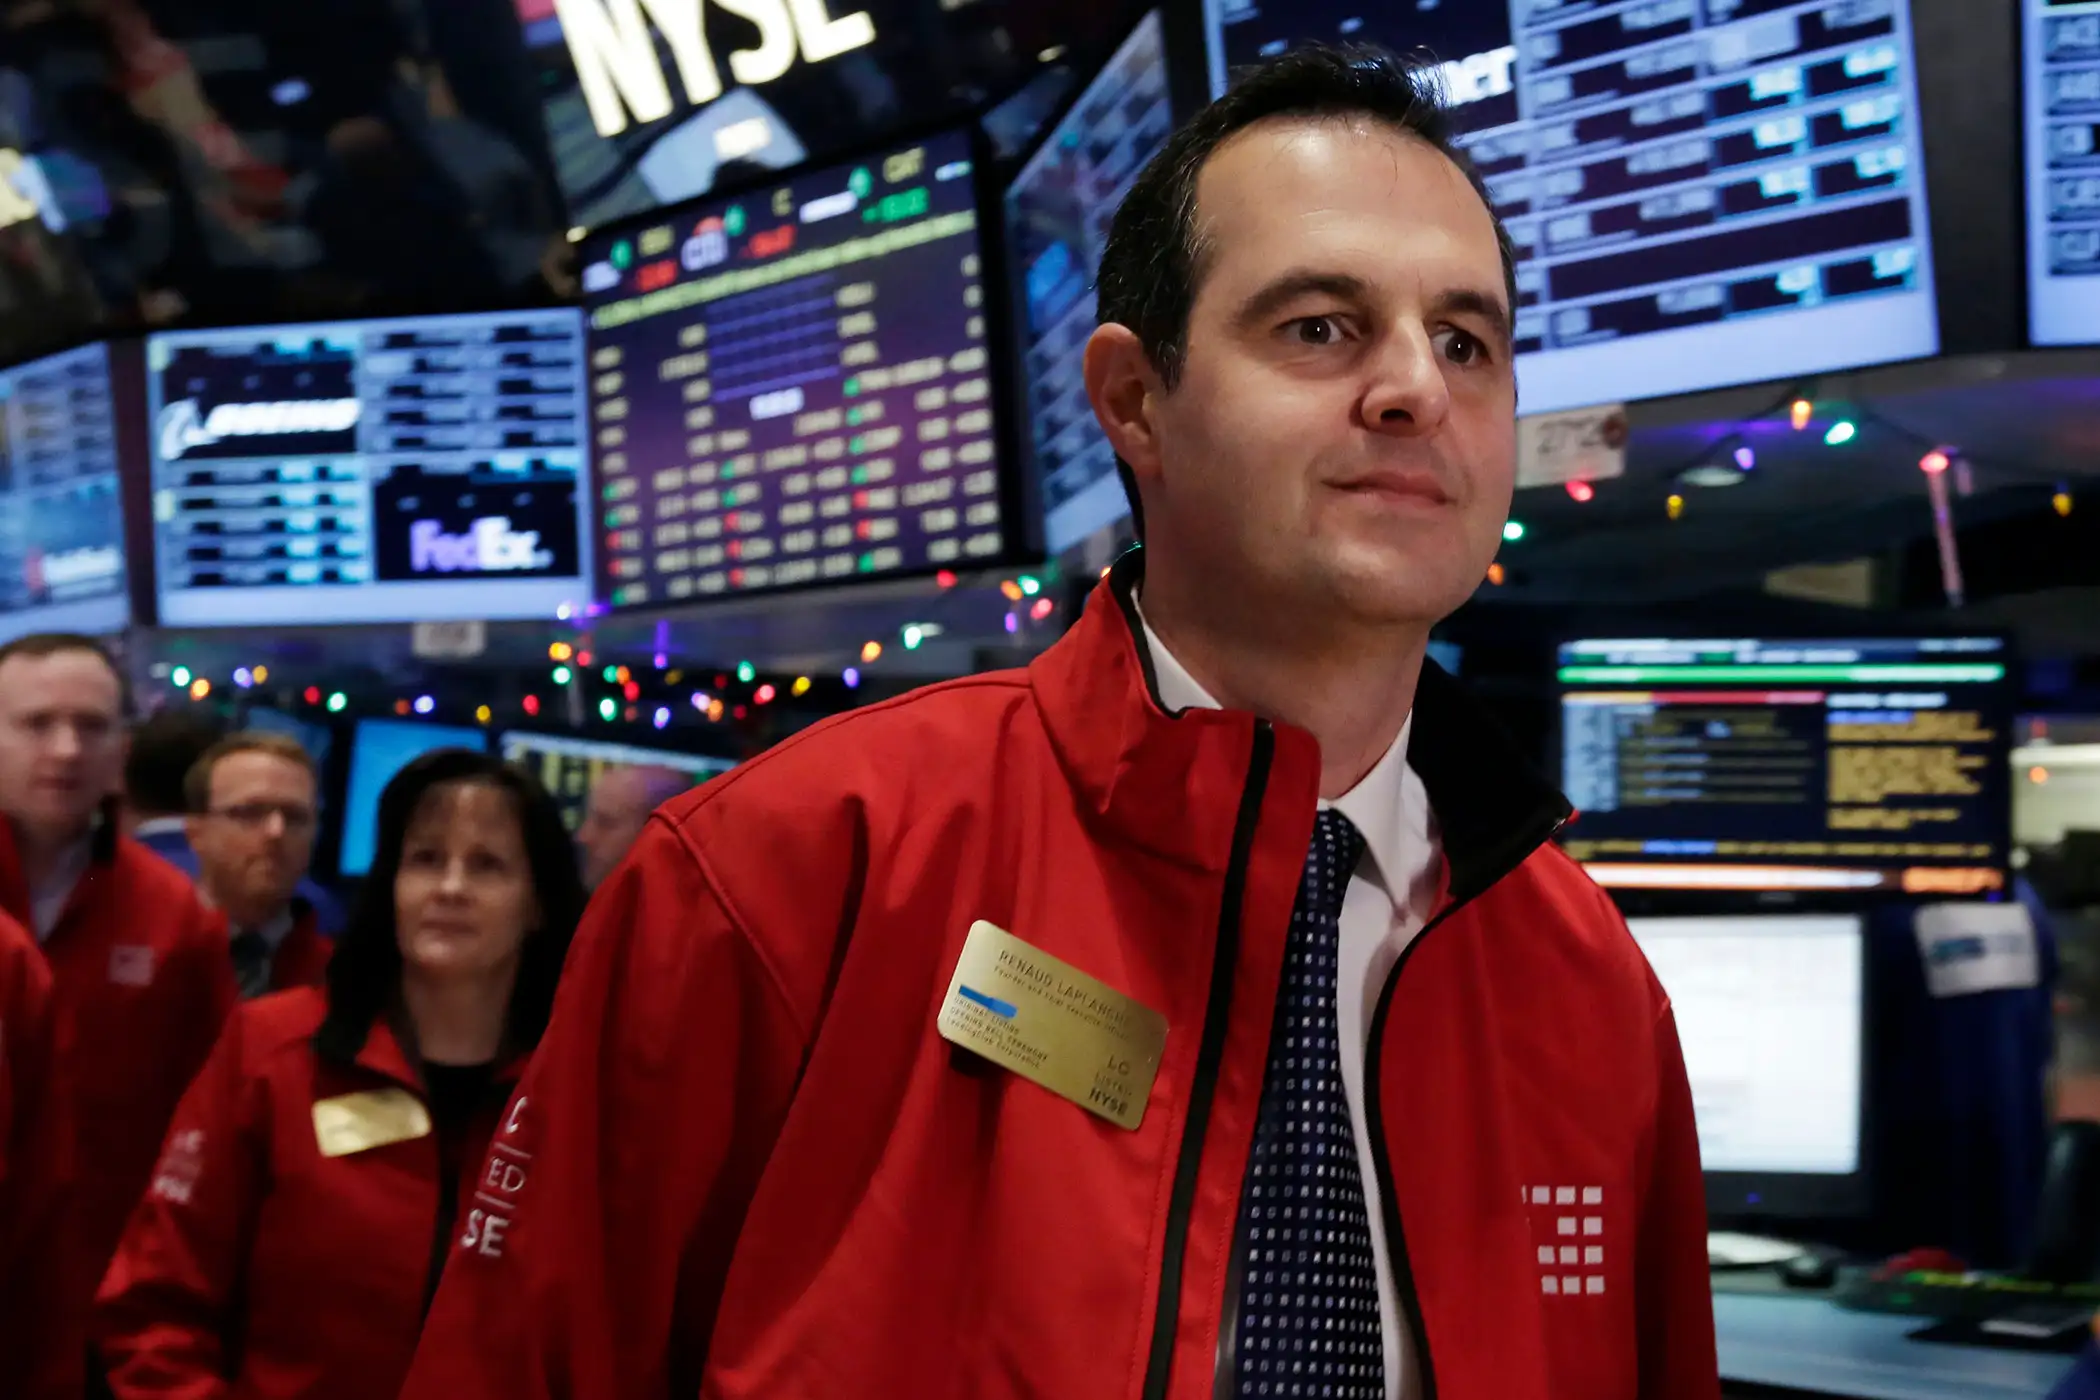 In this Dec. 11, 2014, file photo, Renaud Laplanche, founder &amp; CEO of Lending Club, arrives on the floor of the New York Stock Exchange, prior to his company's IPO. Lending Club Chairman and CEO Laplanche is resigning after the online lender says it conducted an internal probe related to issues with how a loan was sold to an investor.